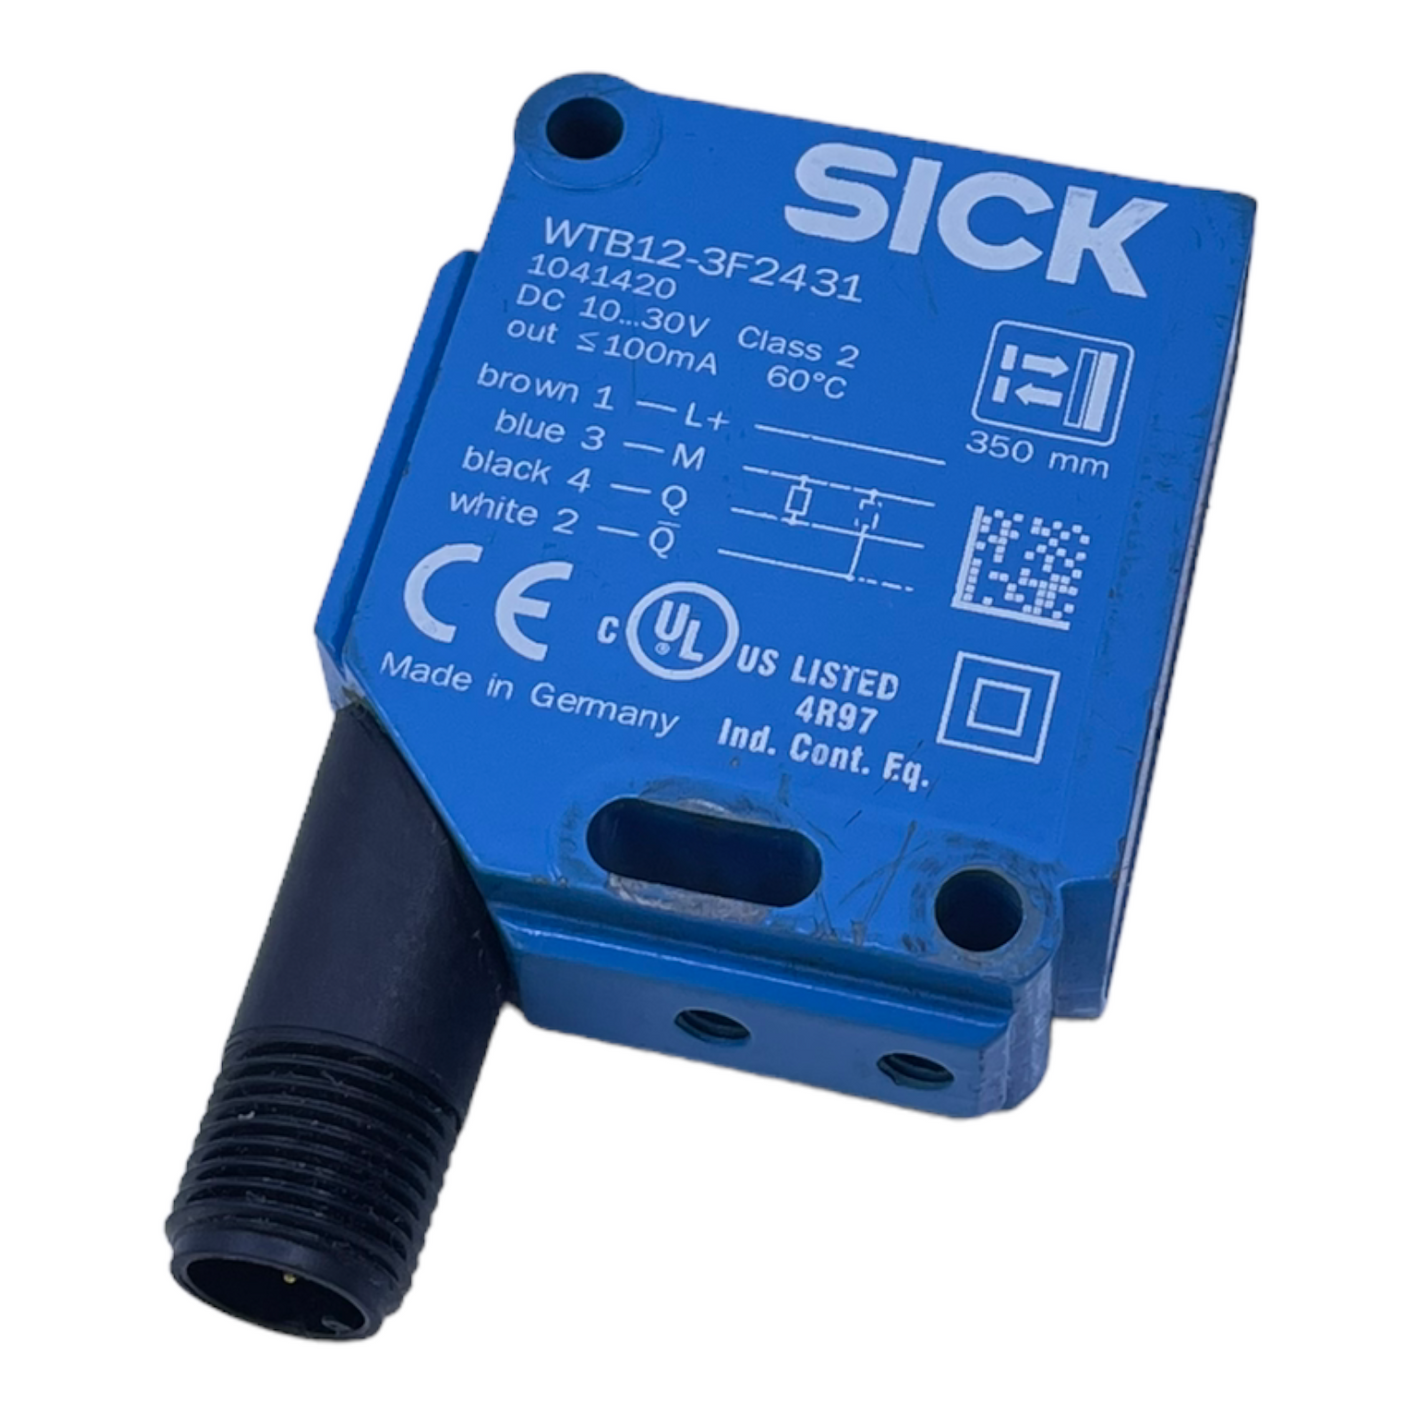 Sick WTB12-3F2431 reflective photoelectric switch 1041420 sensor for industrial use 